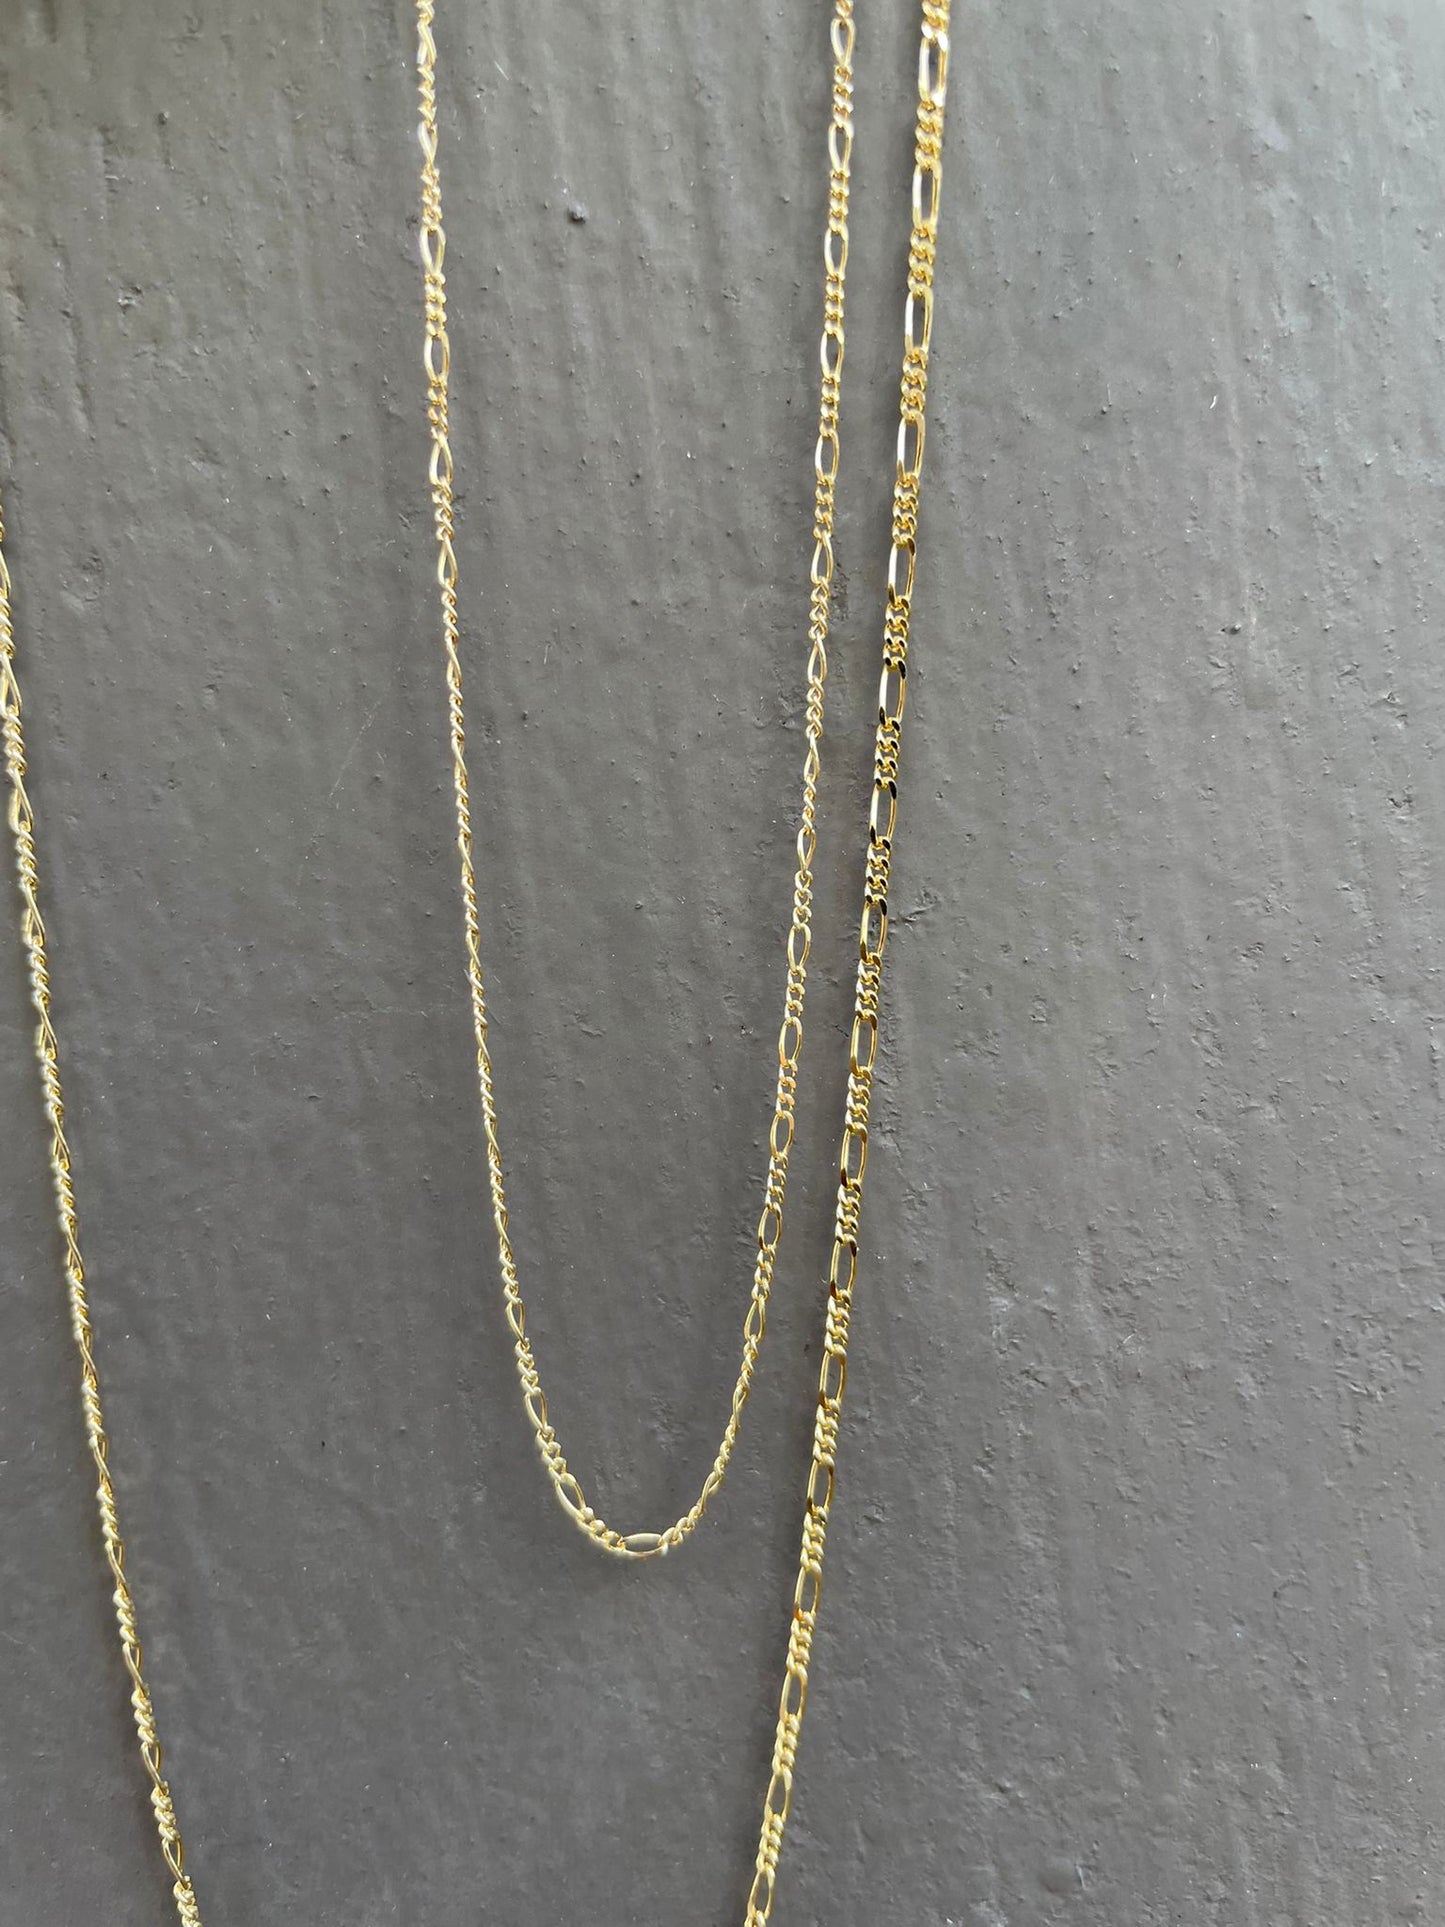 18 karat gold Figaro chain. The chain features an alternating pattern of elongated oval links and shorter round links. It is available in a variety of lengths.